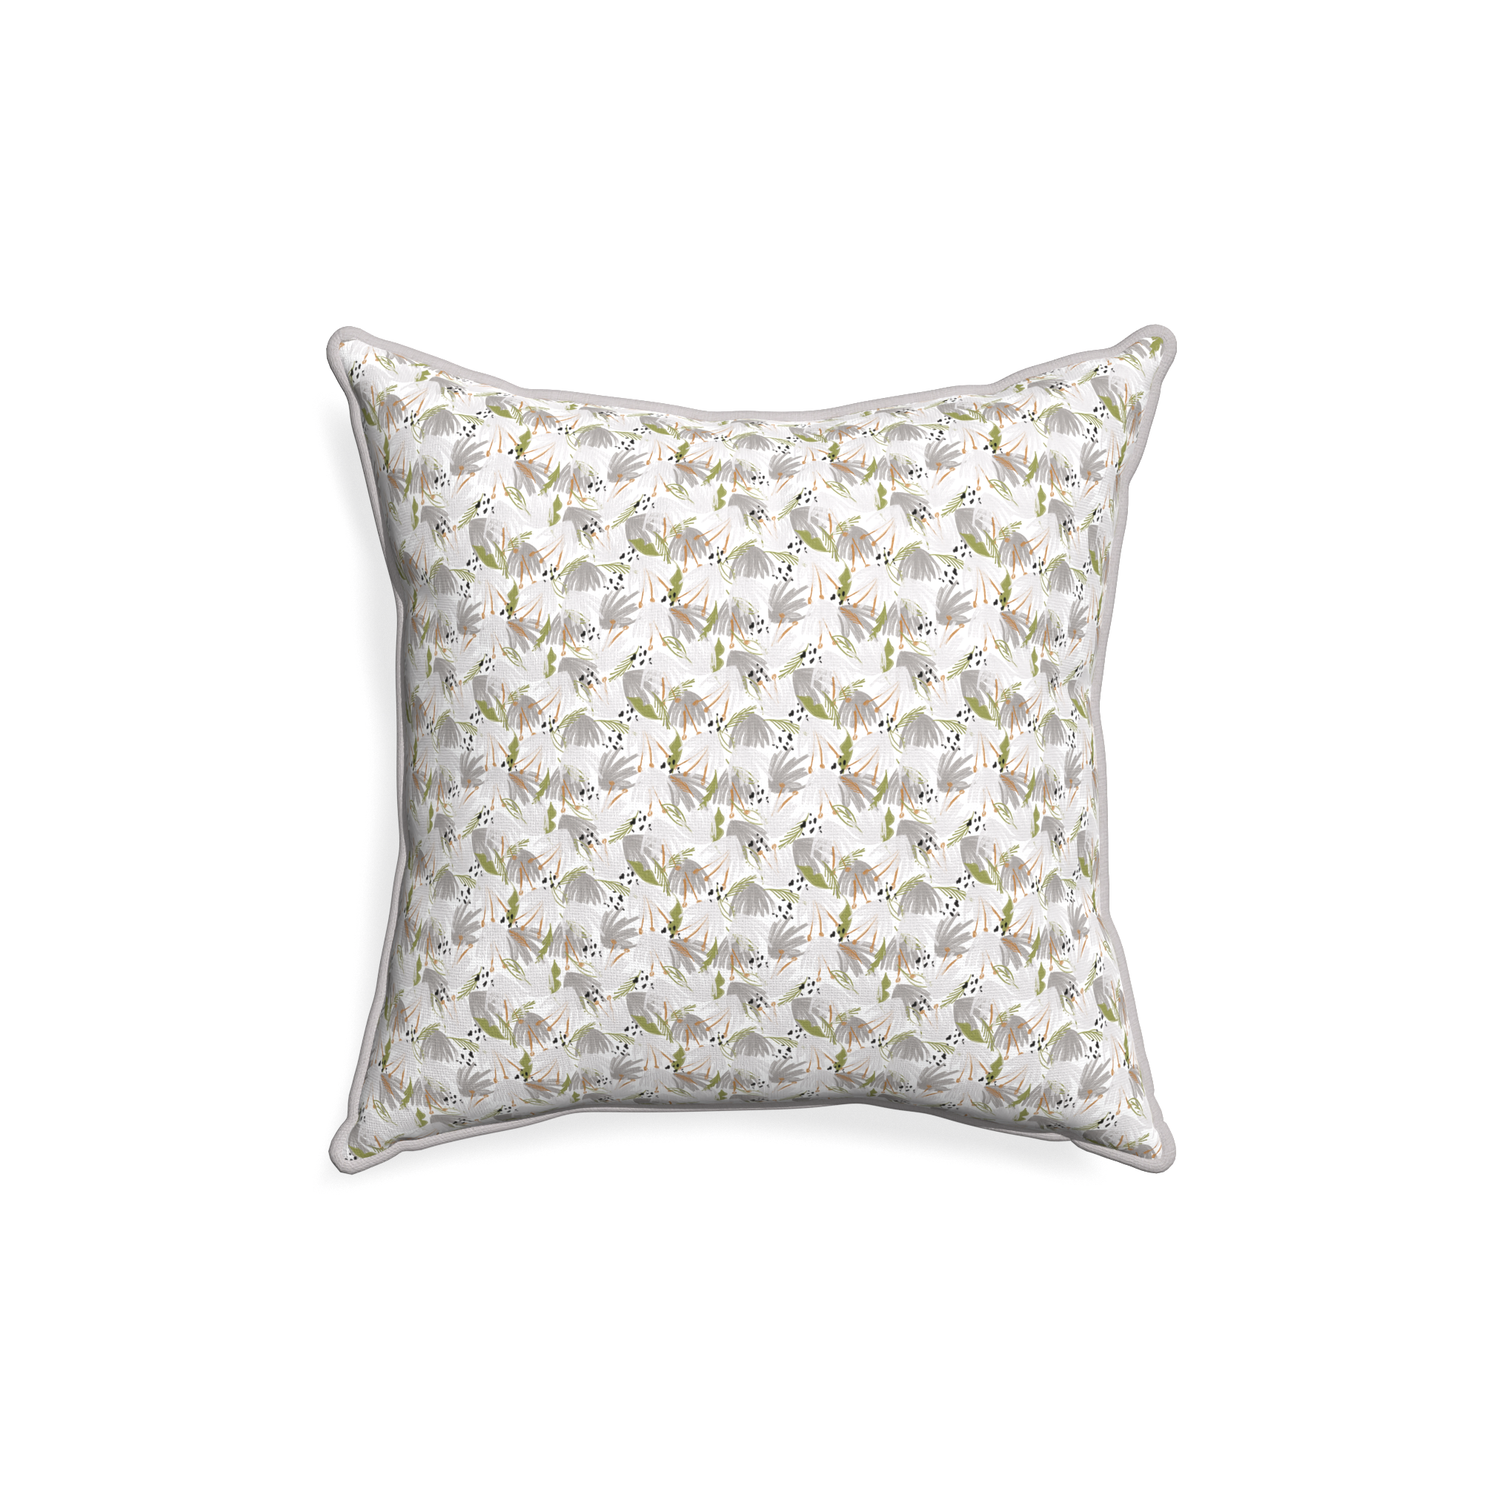 18-square eden grey custom pillow with pebble piping on white background